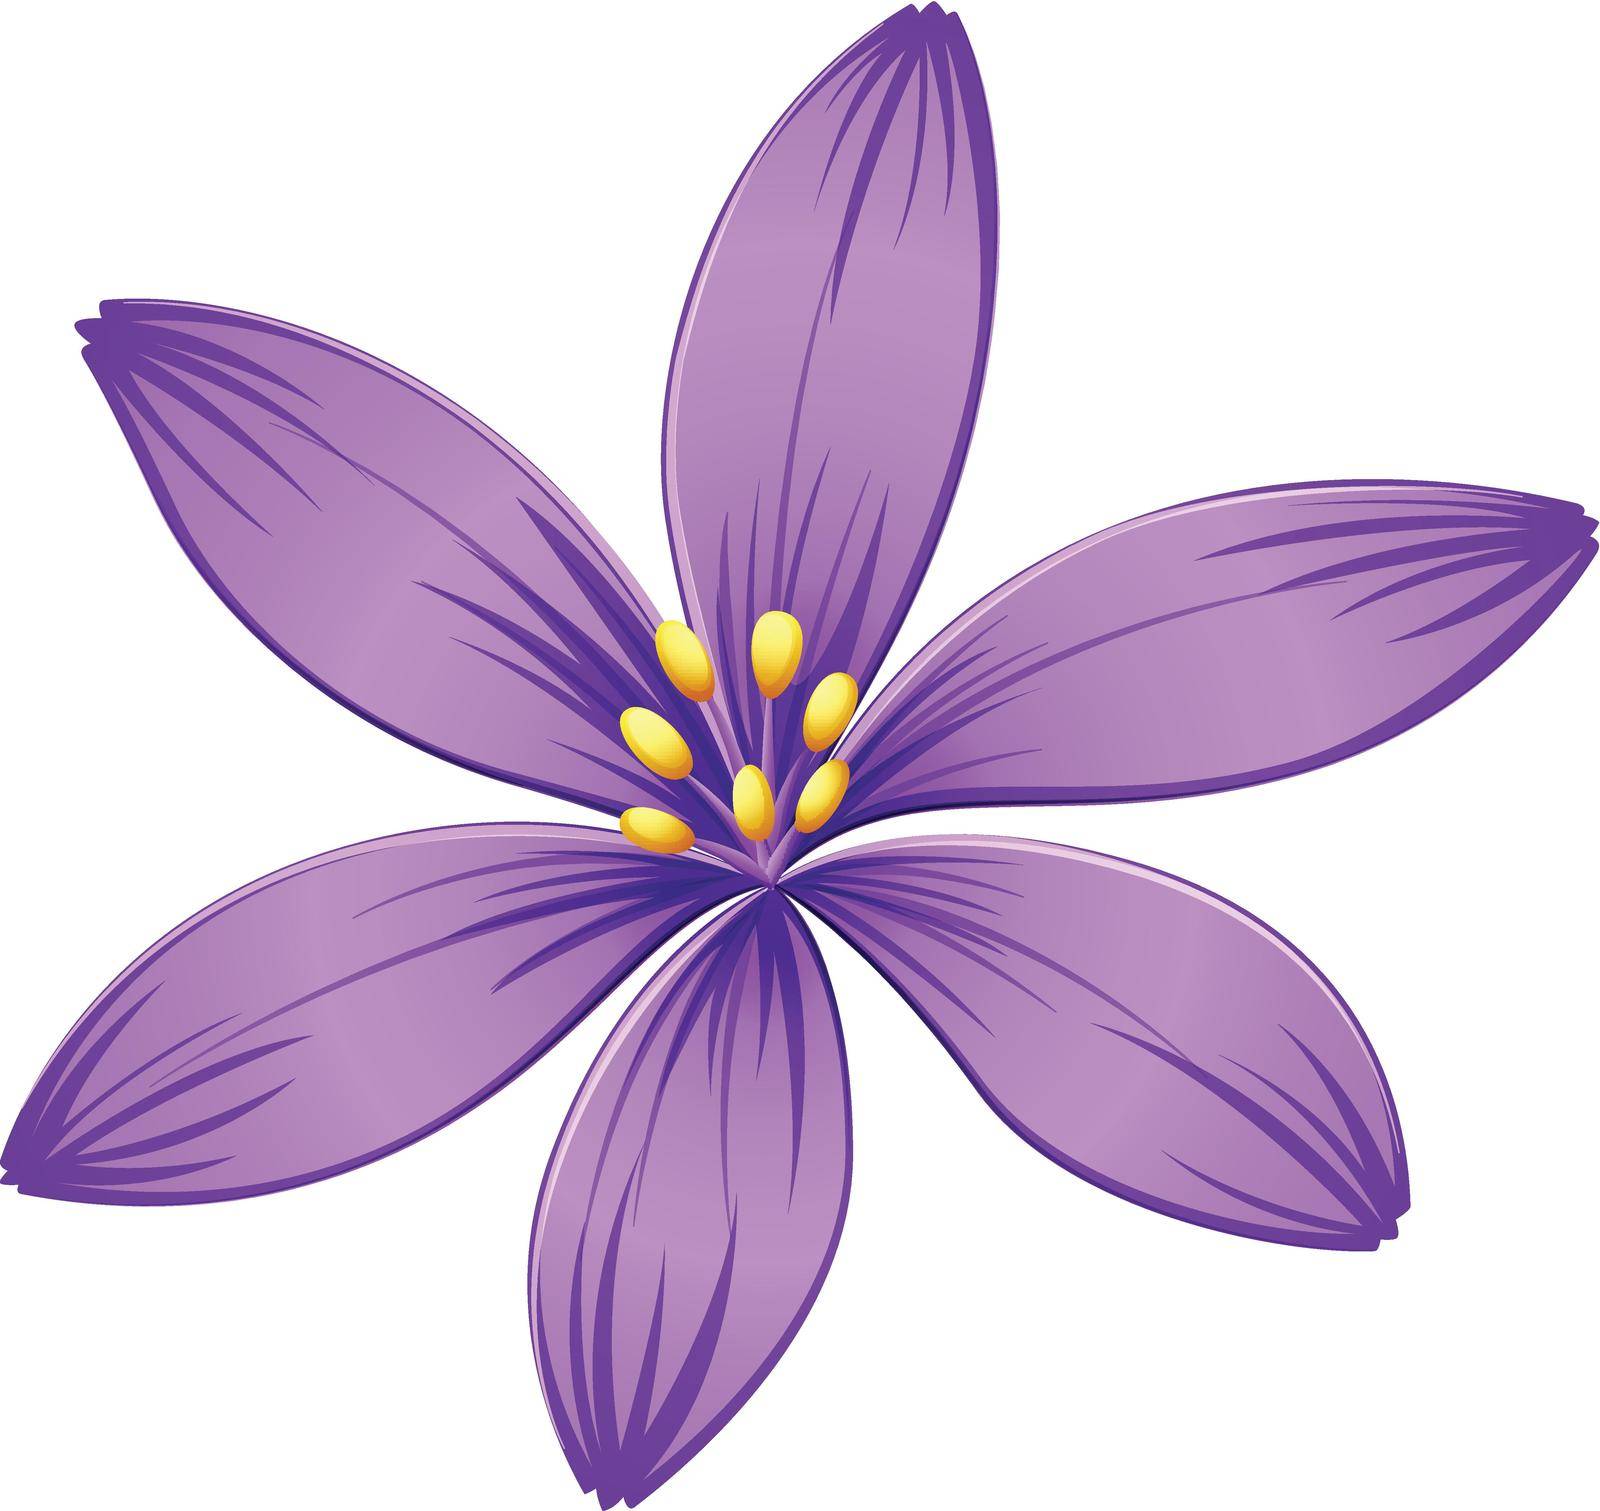 Illustration of a five-petal purple flower on a white background